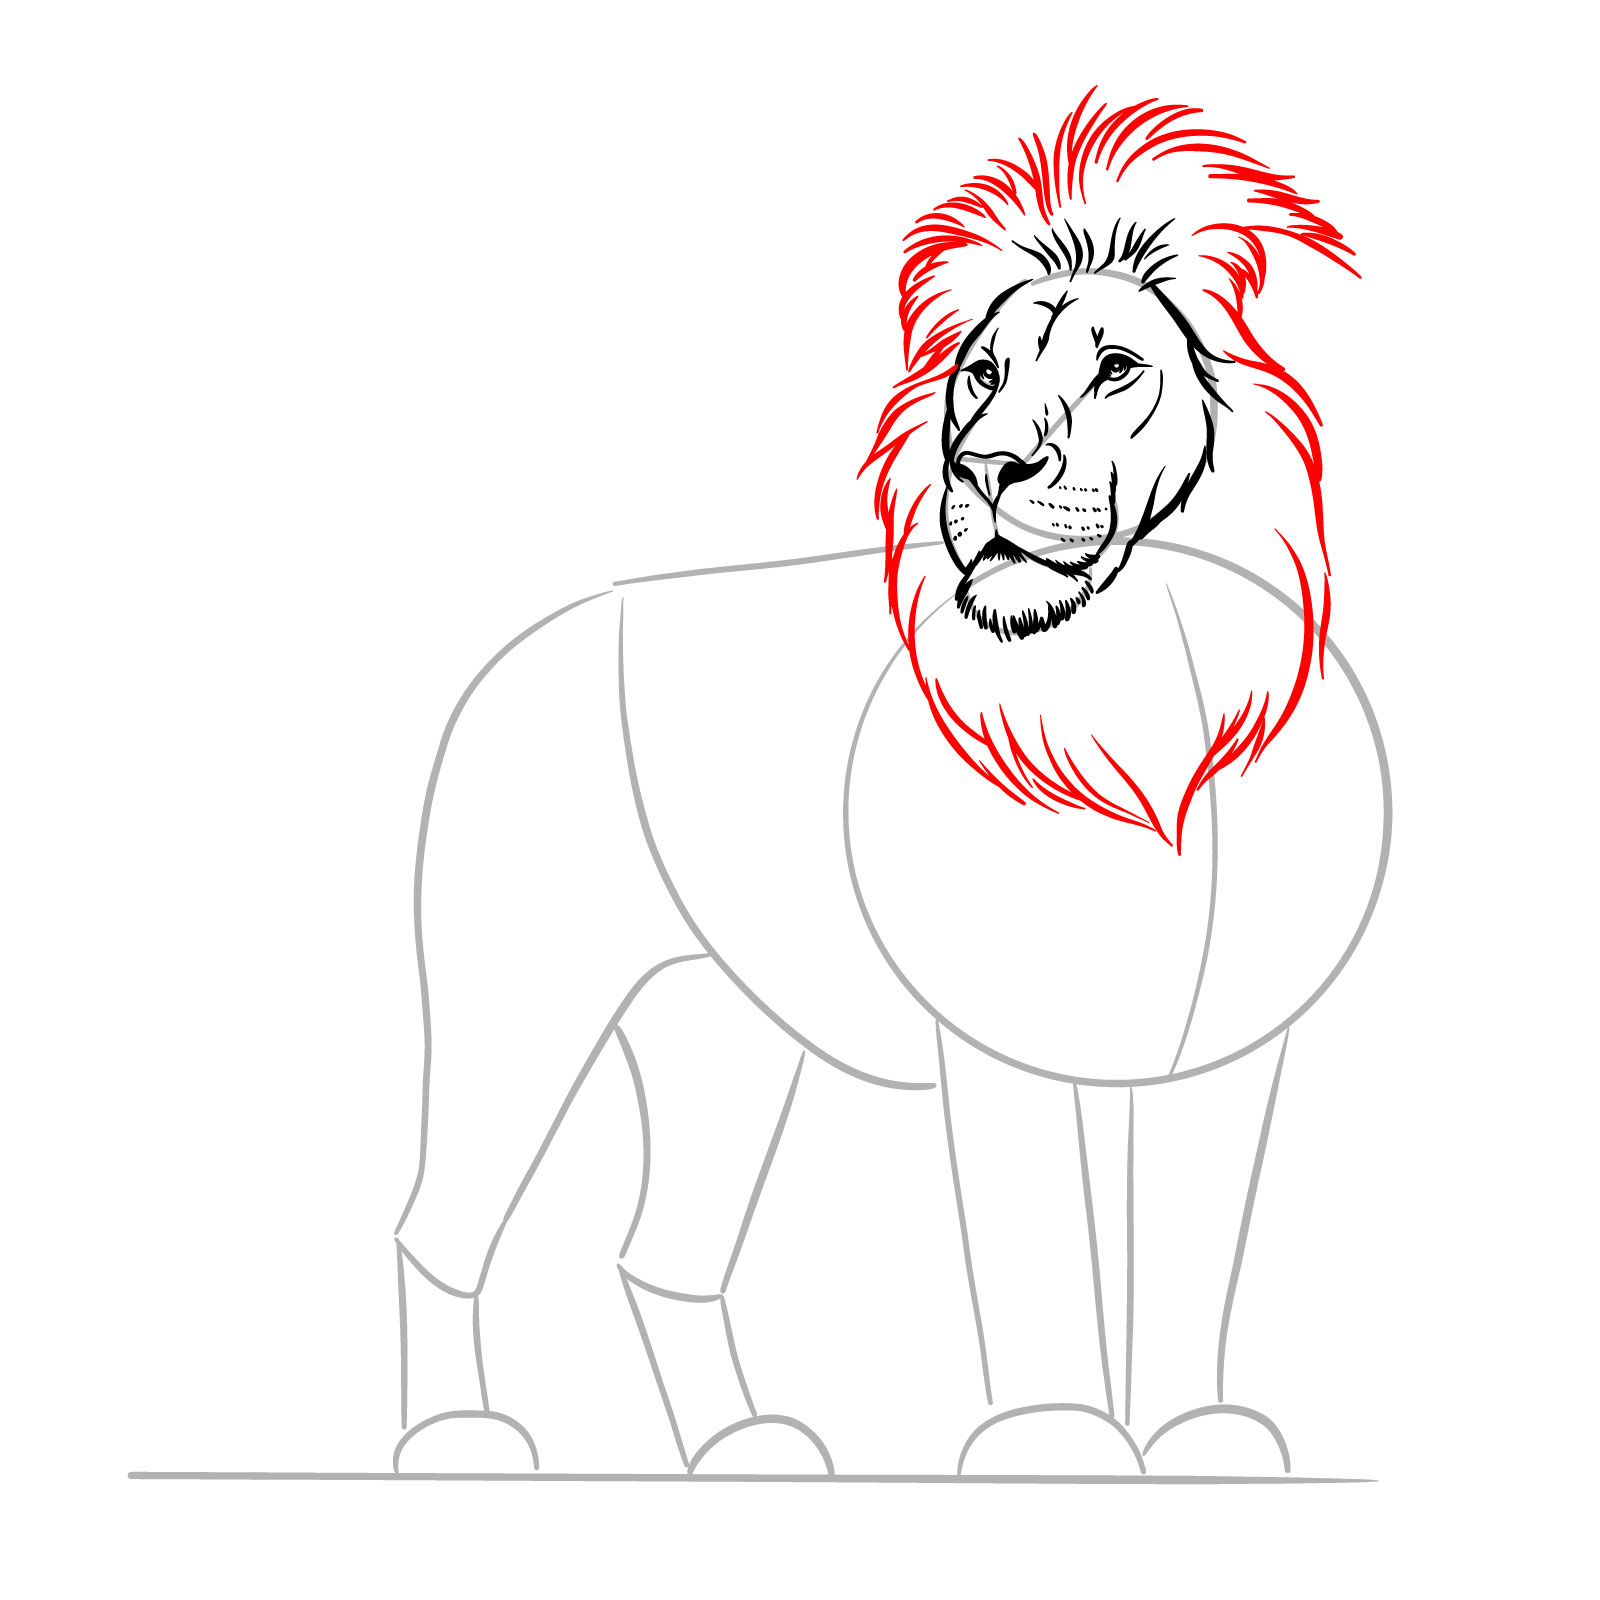 Creating the outline of the mane in a step-by-step guide for a standing lion drawing - step 07